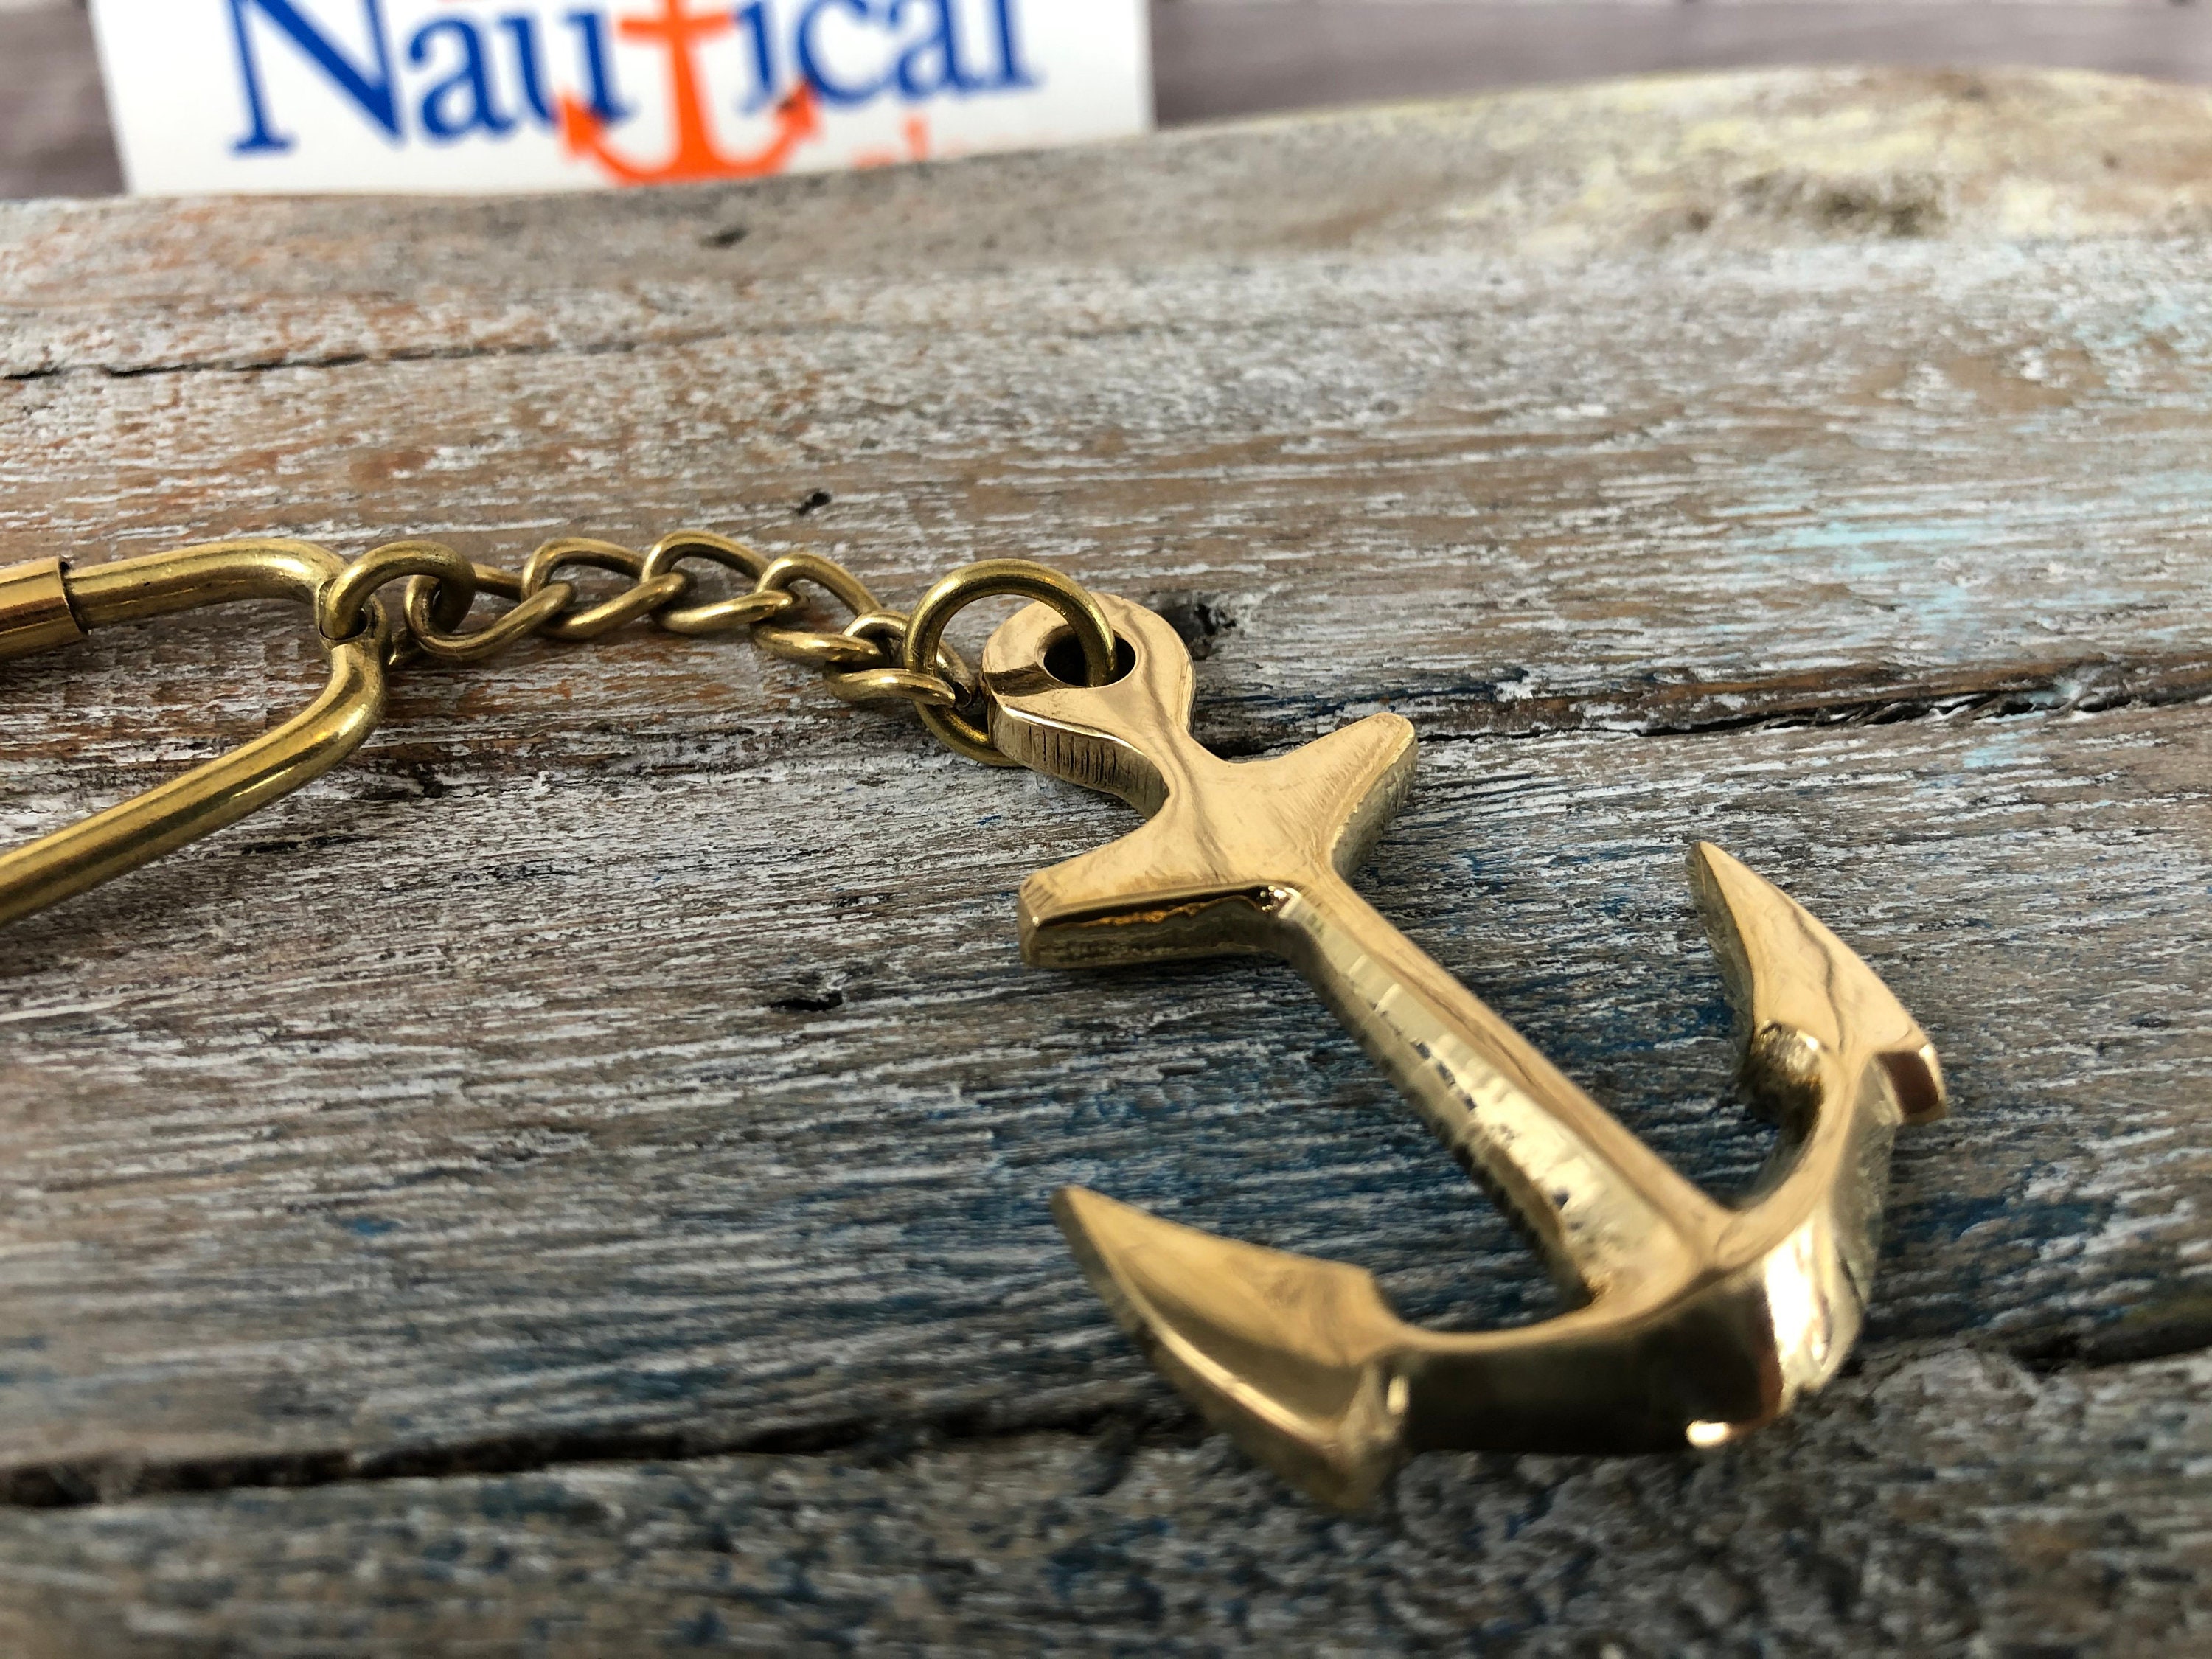 Nautical Theme Brass Key Chains – Bygone Days Eclectic Emporium